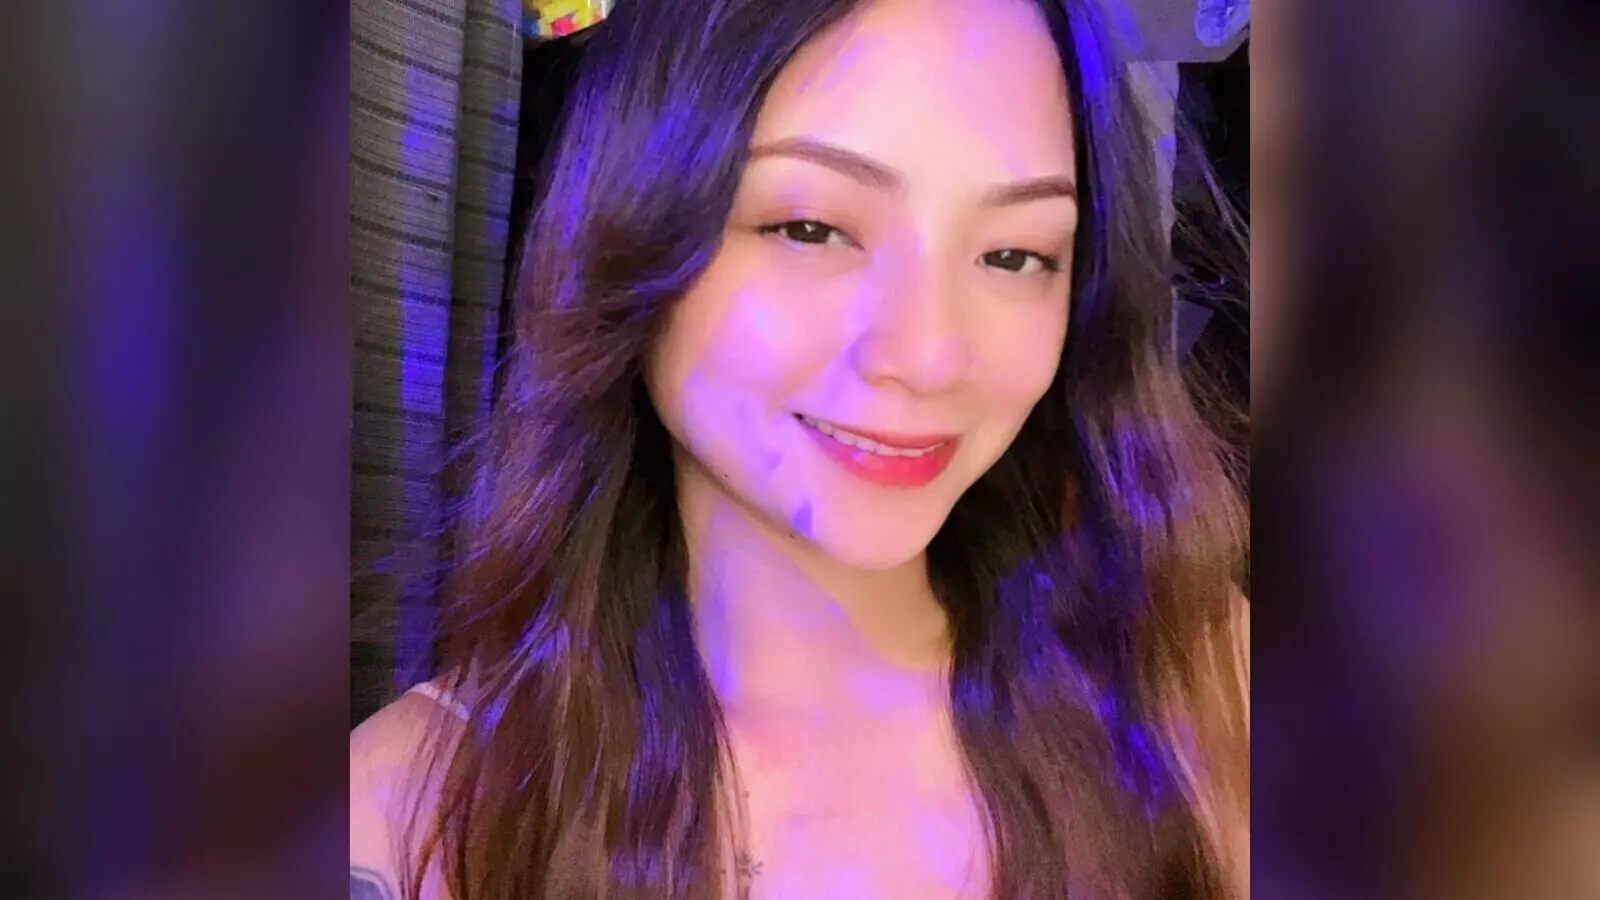 Enter LexPinay Recorded Private